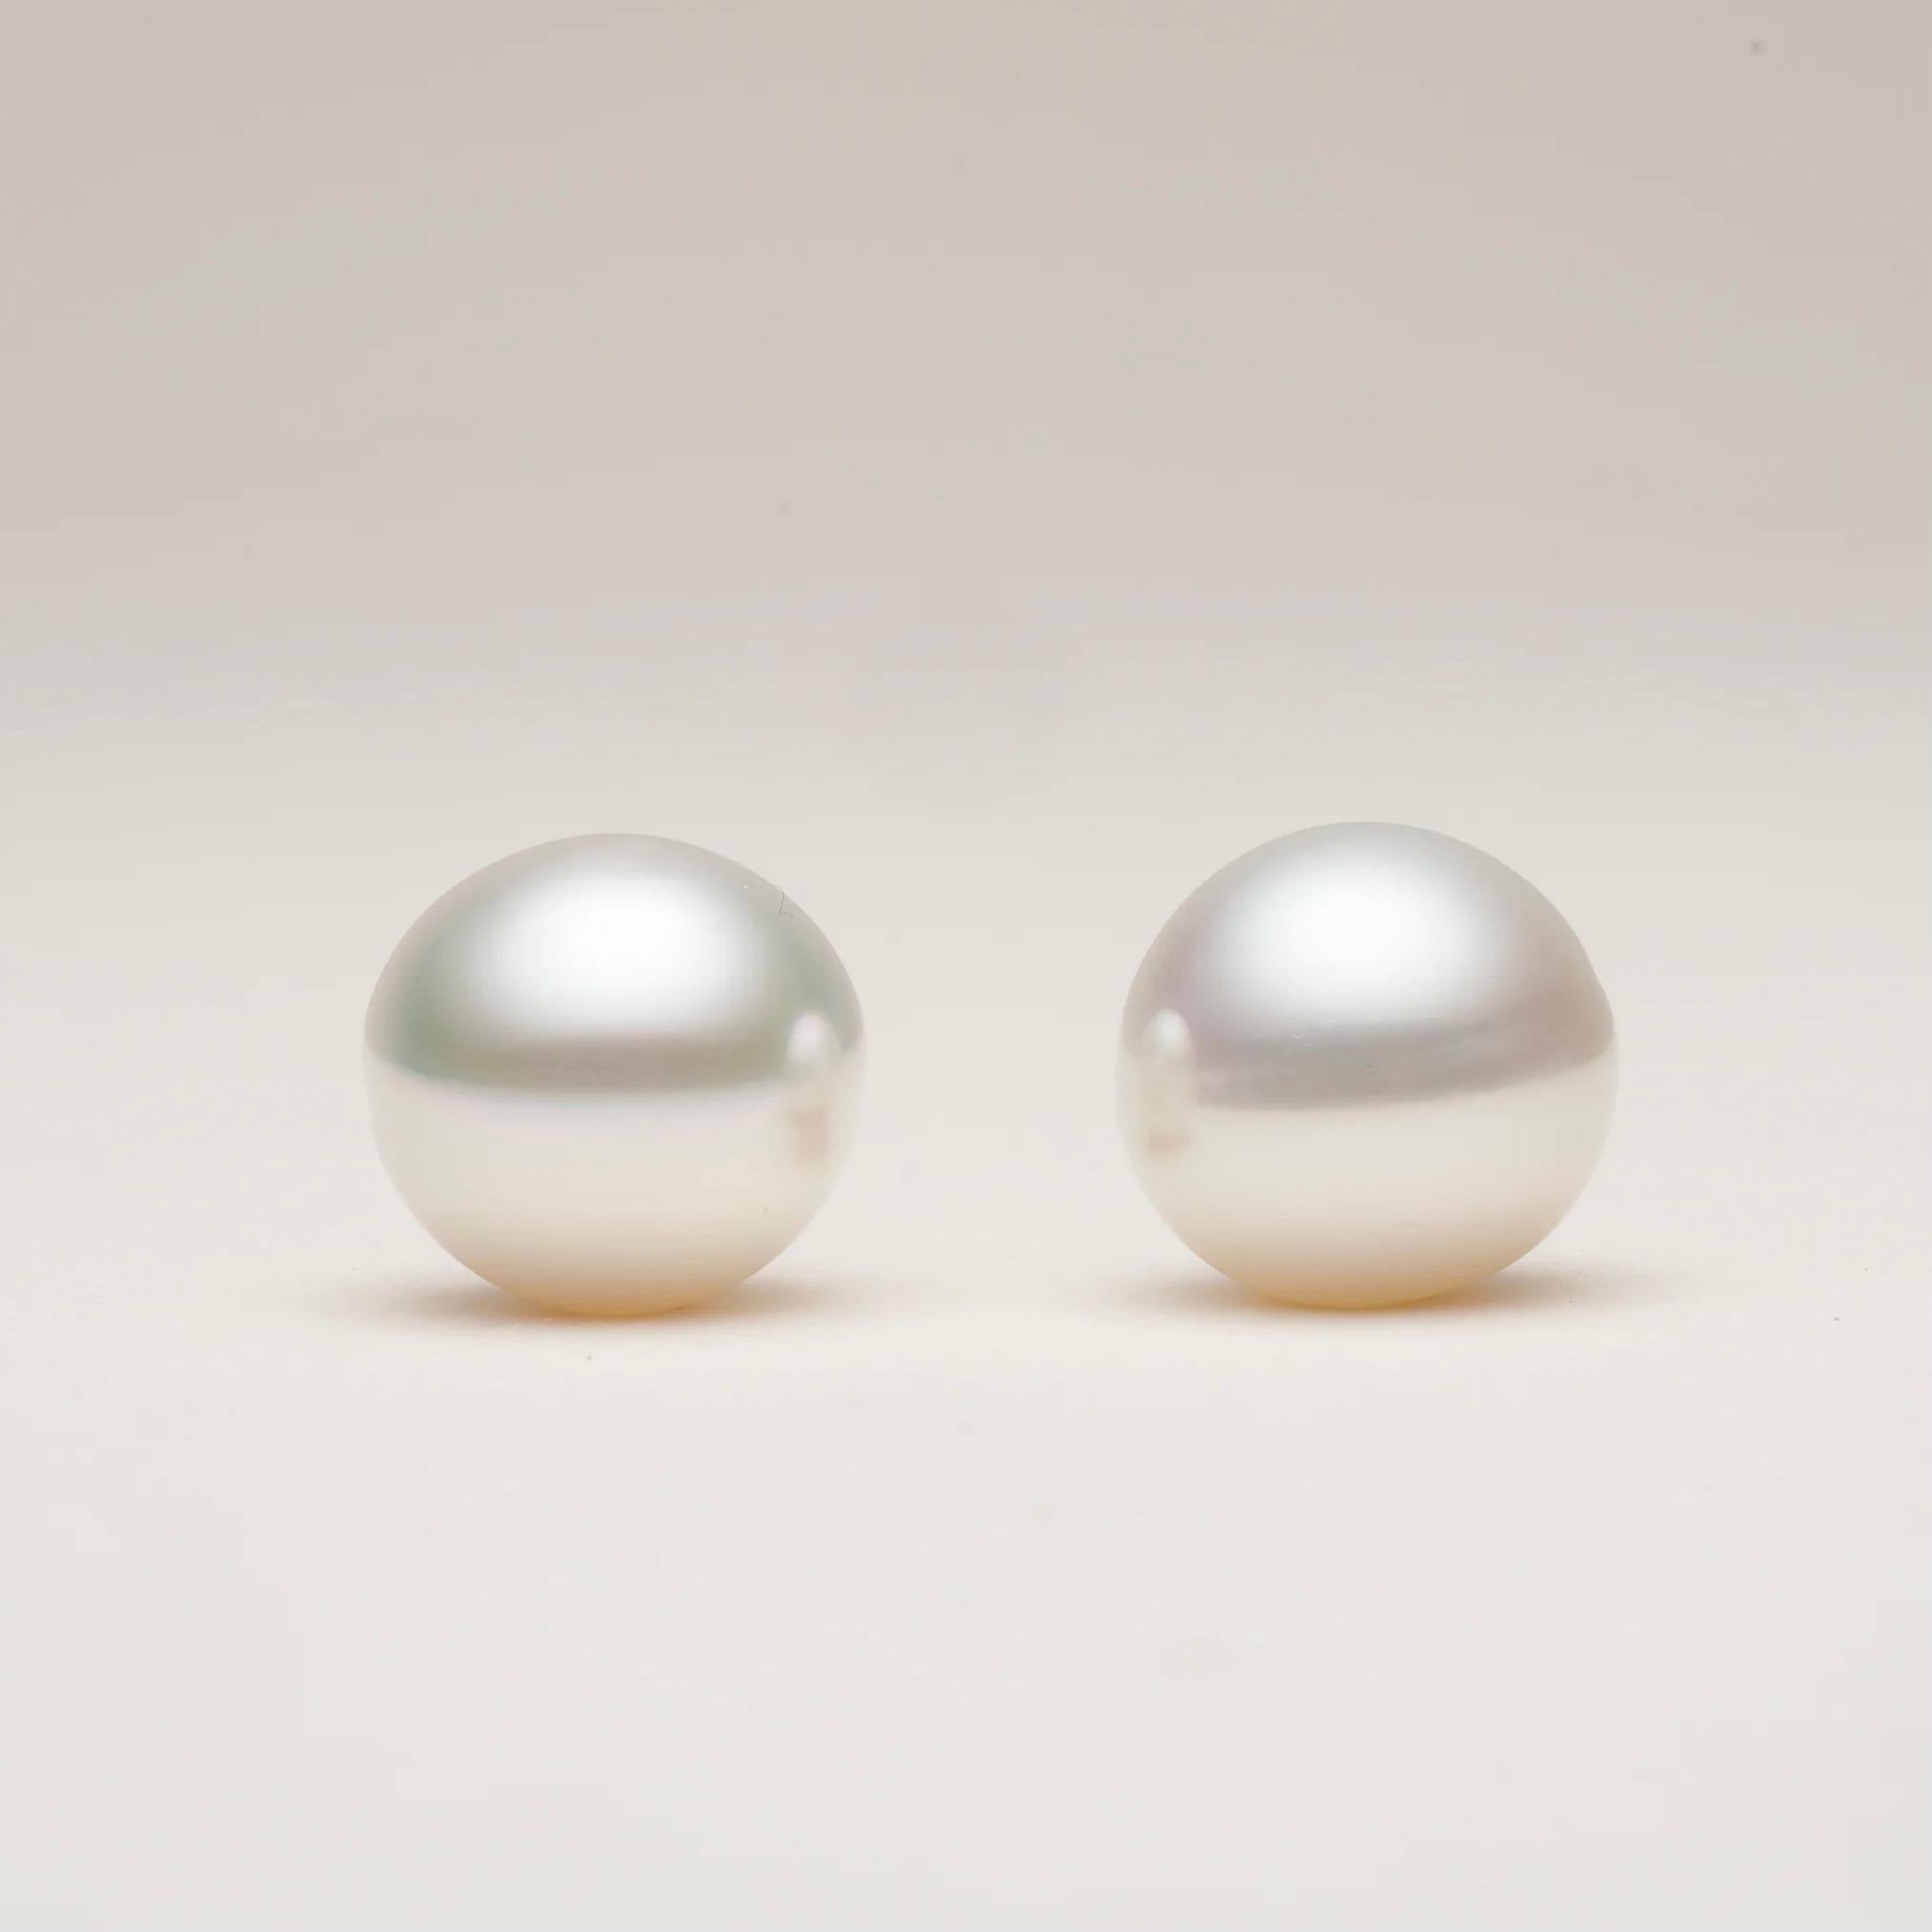 PAIR OF CIRCLE 12 MM PEARLS, FLAWLESS COMPLEXION, AAA/AA LUSTRE, WHITE WITH PINK OVERTONE.


GUARANTEED NATURAL COLOUR AND LUSTRE

These pearls display their natural colour and lustre and have not been subjected to chemical enhancements or